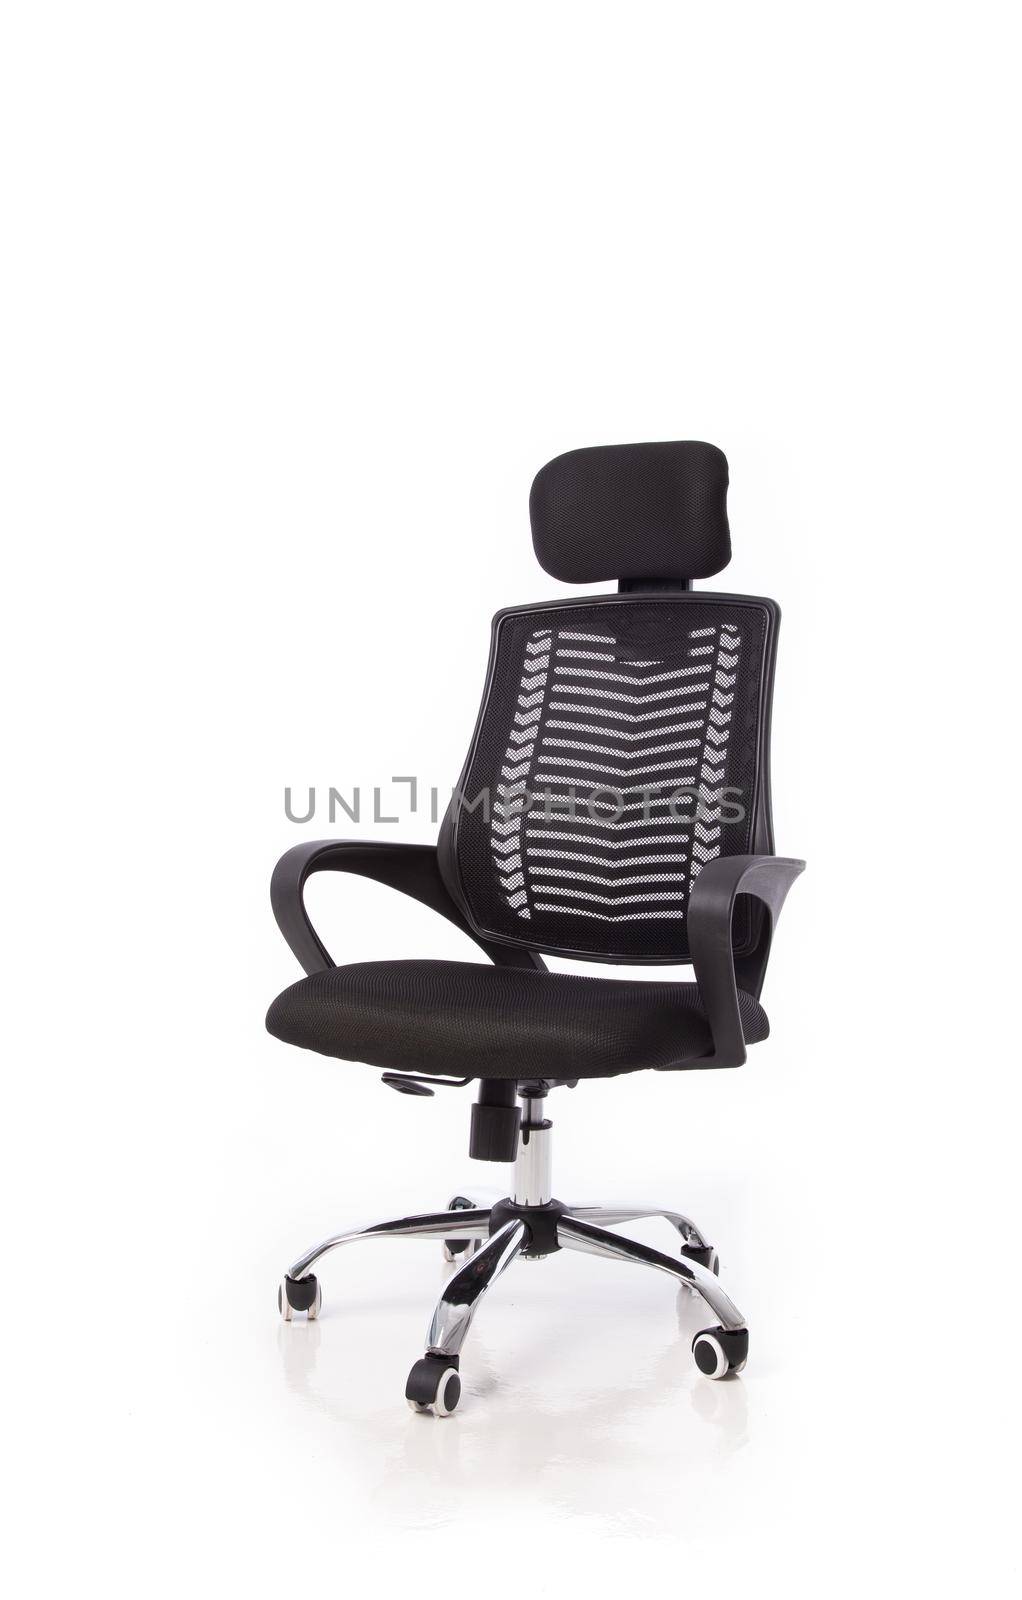 office chair with black backrest, black seat and handles, stainless steel legs, isolated on white background